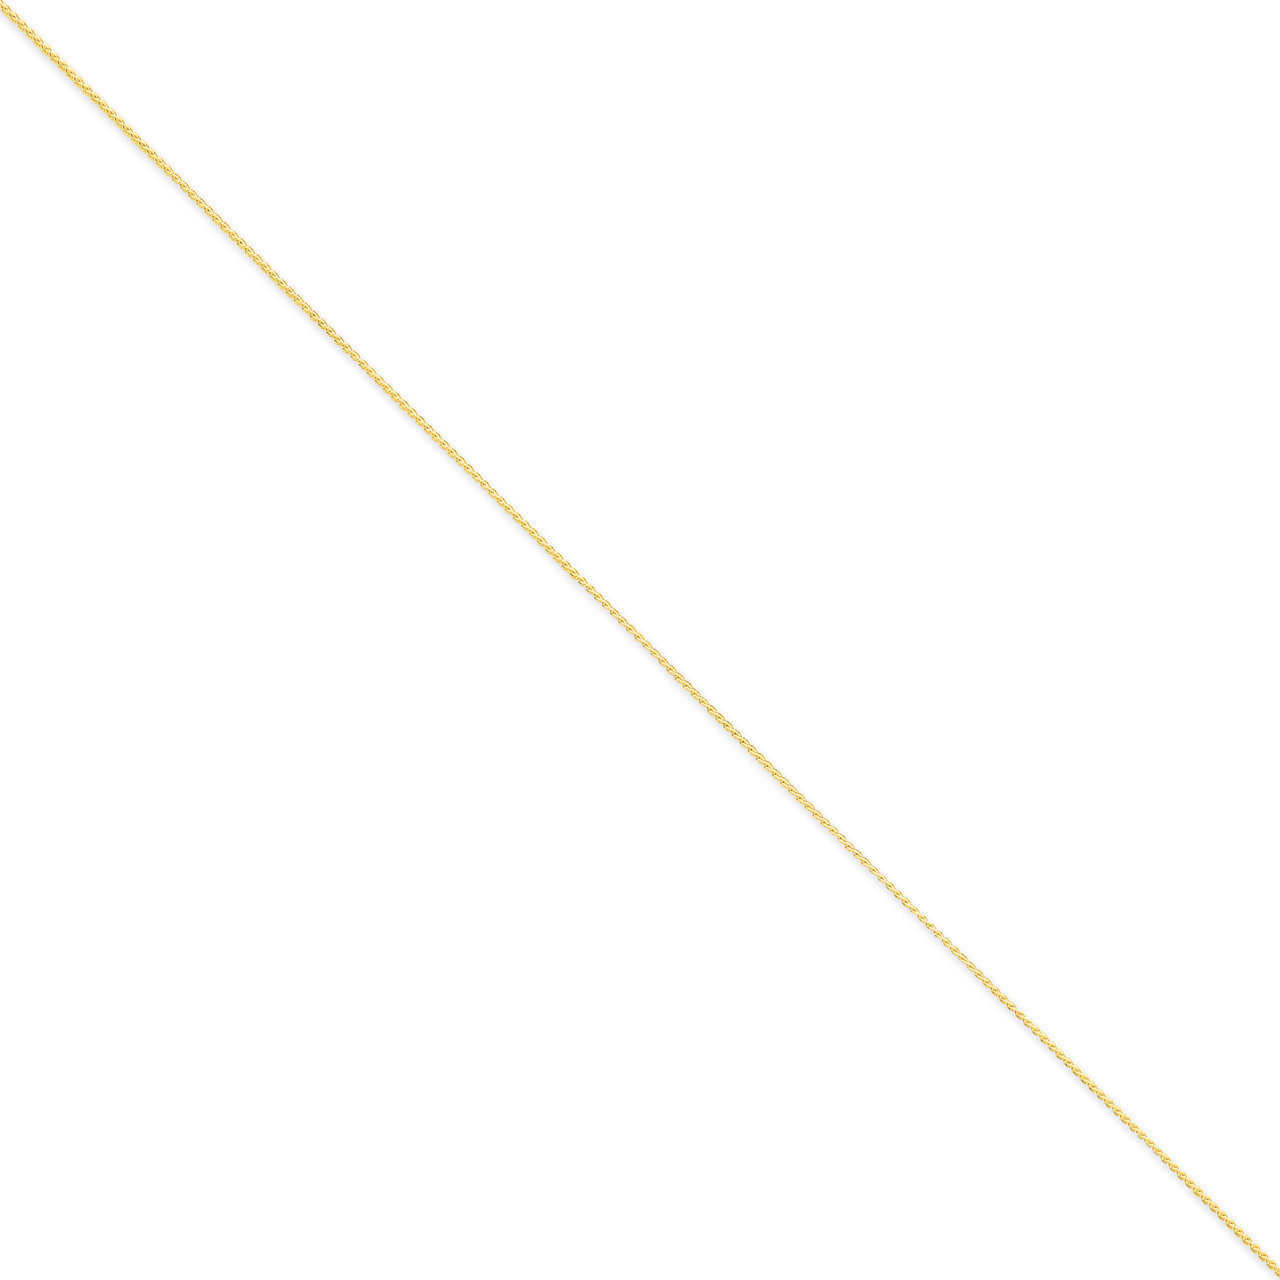 1.1mm Solid Polished Spiga Chain 7 Inch 14k Gold PEN259-7